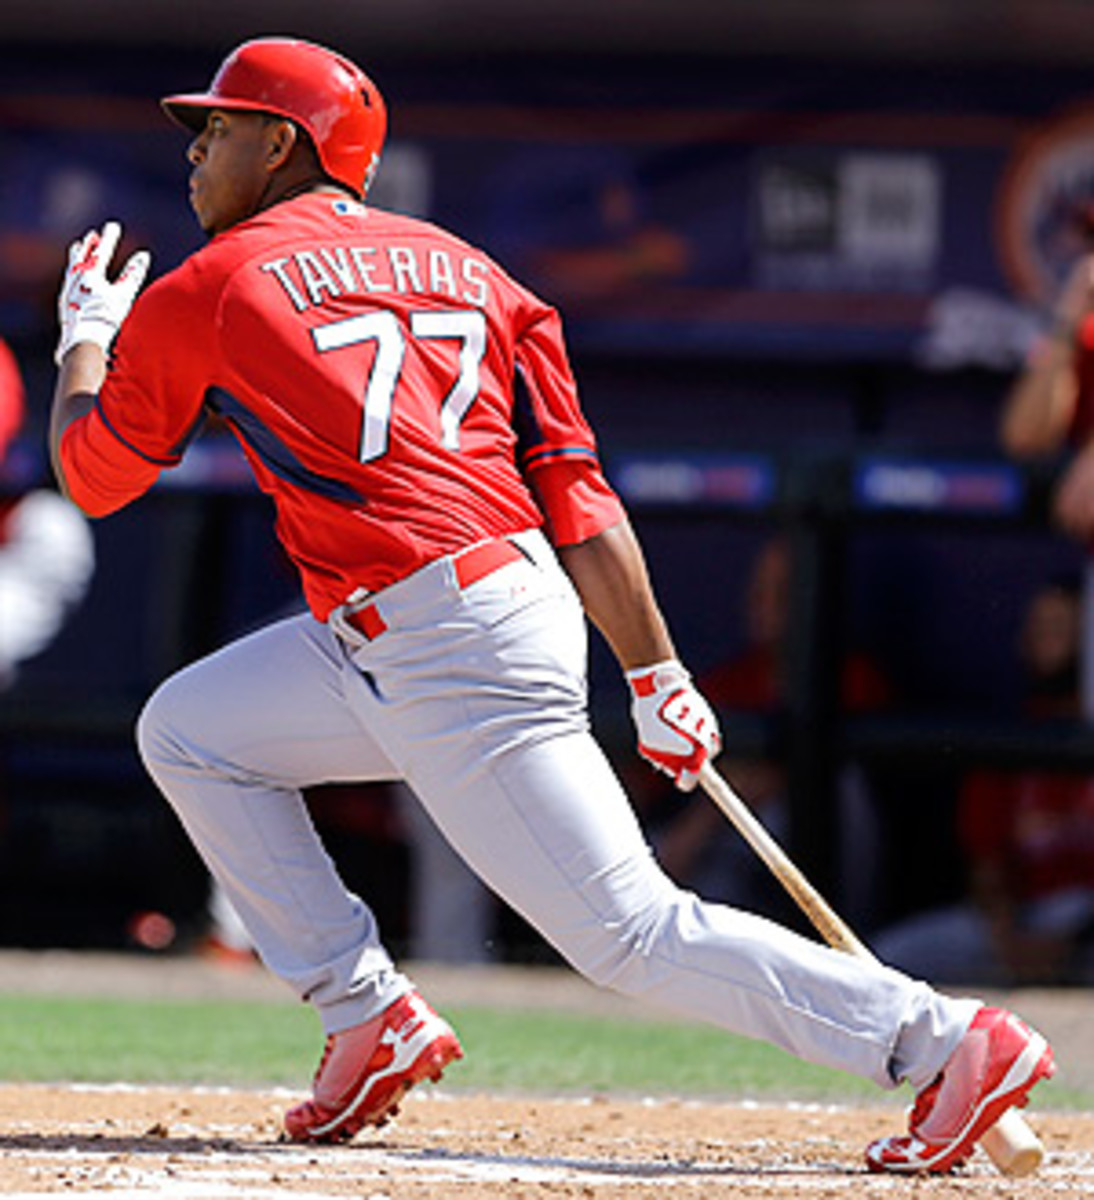 Oscar Taveras is the No. 2 prospect in all of baseball according to MLB.com. 